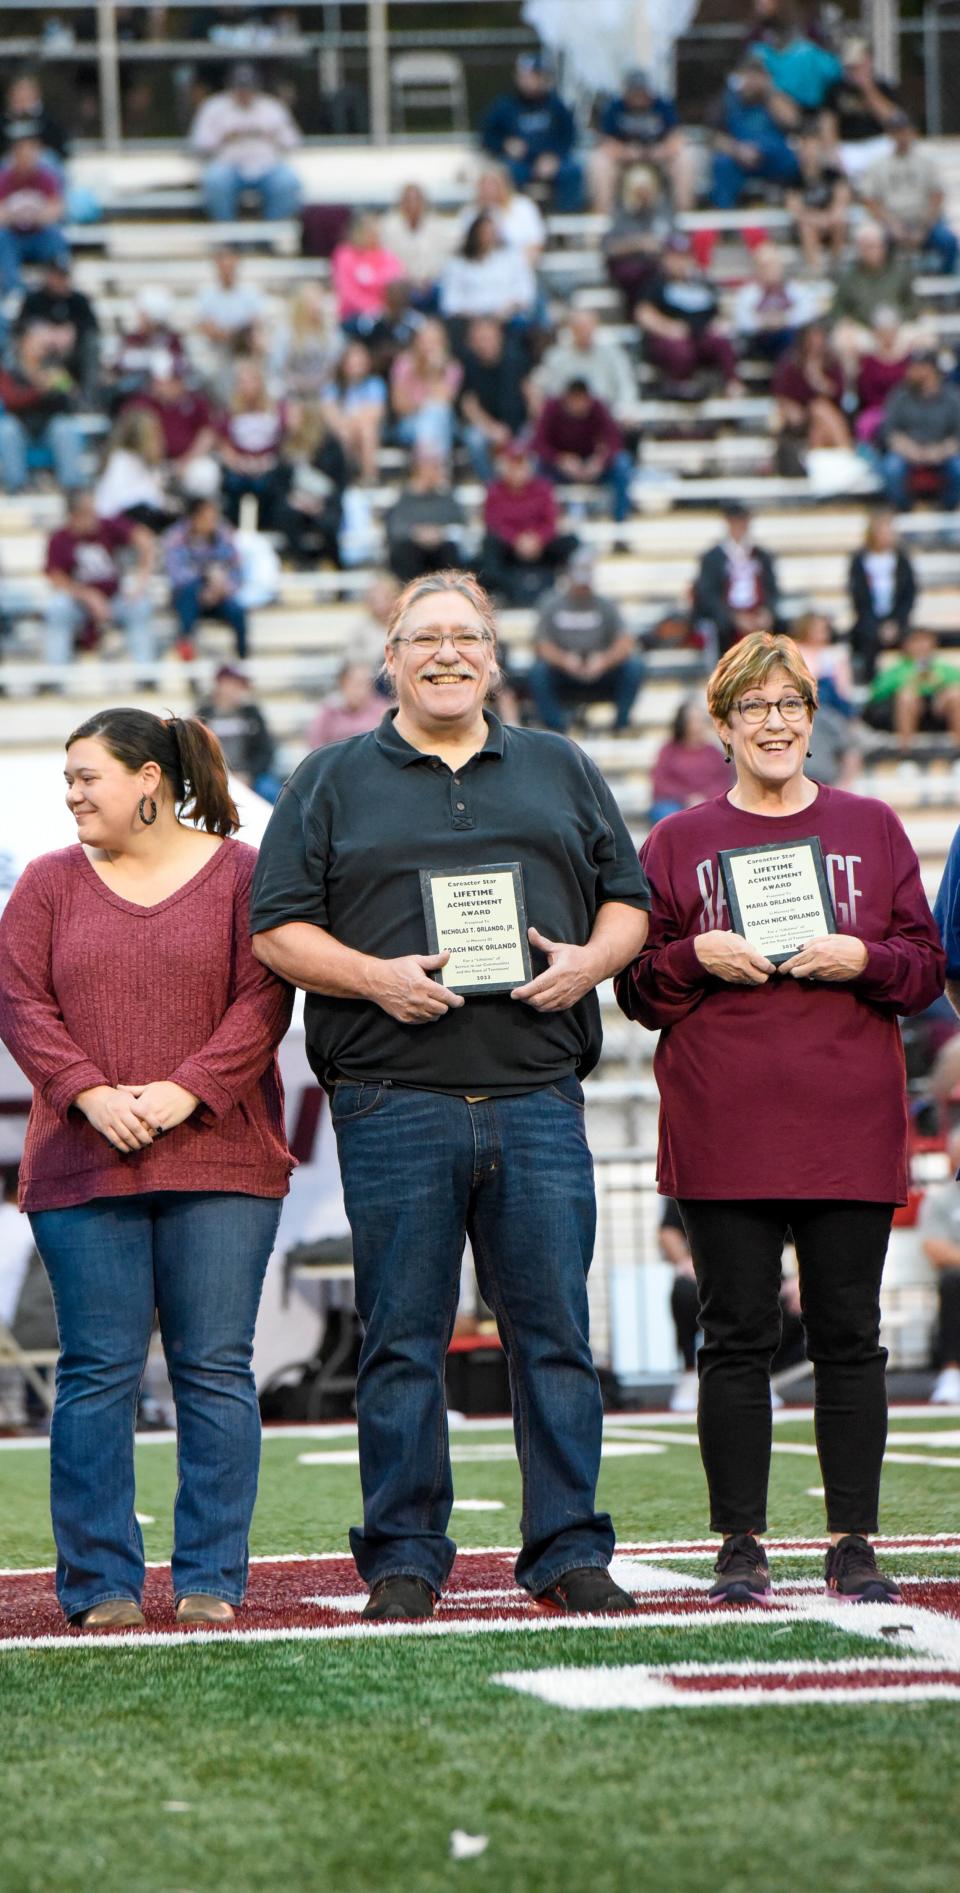 Among the family members accepting the award for the late Nick Orlando are Liz Orlando, Nicky Orlando and Maria Orlando Gee.